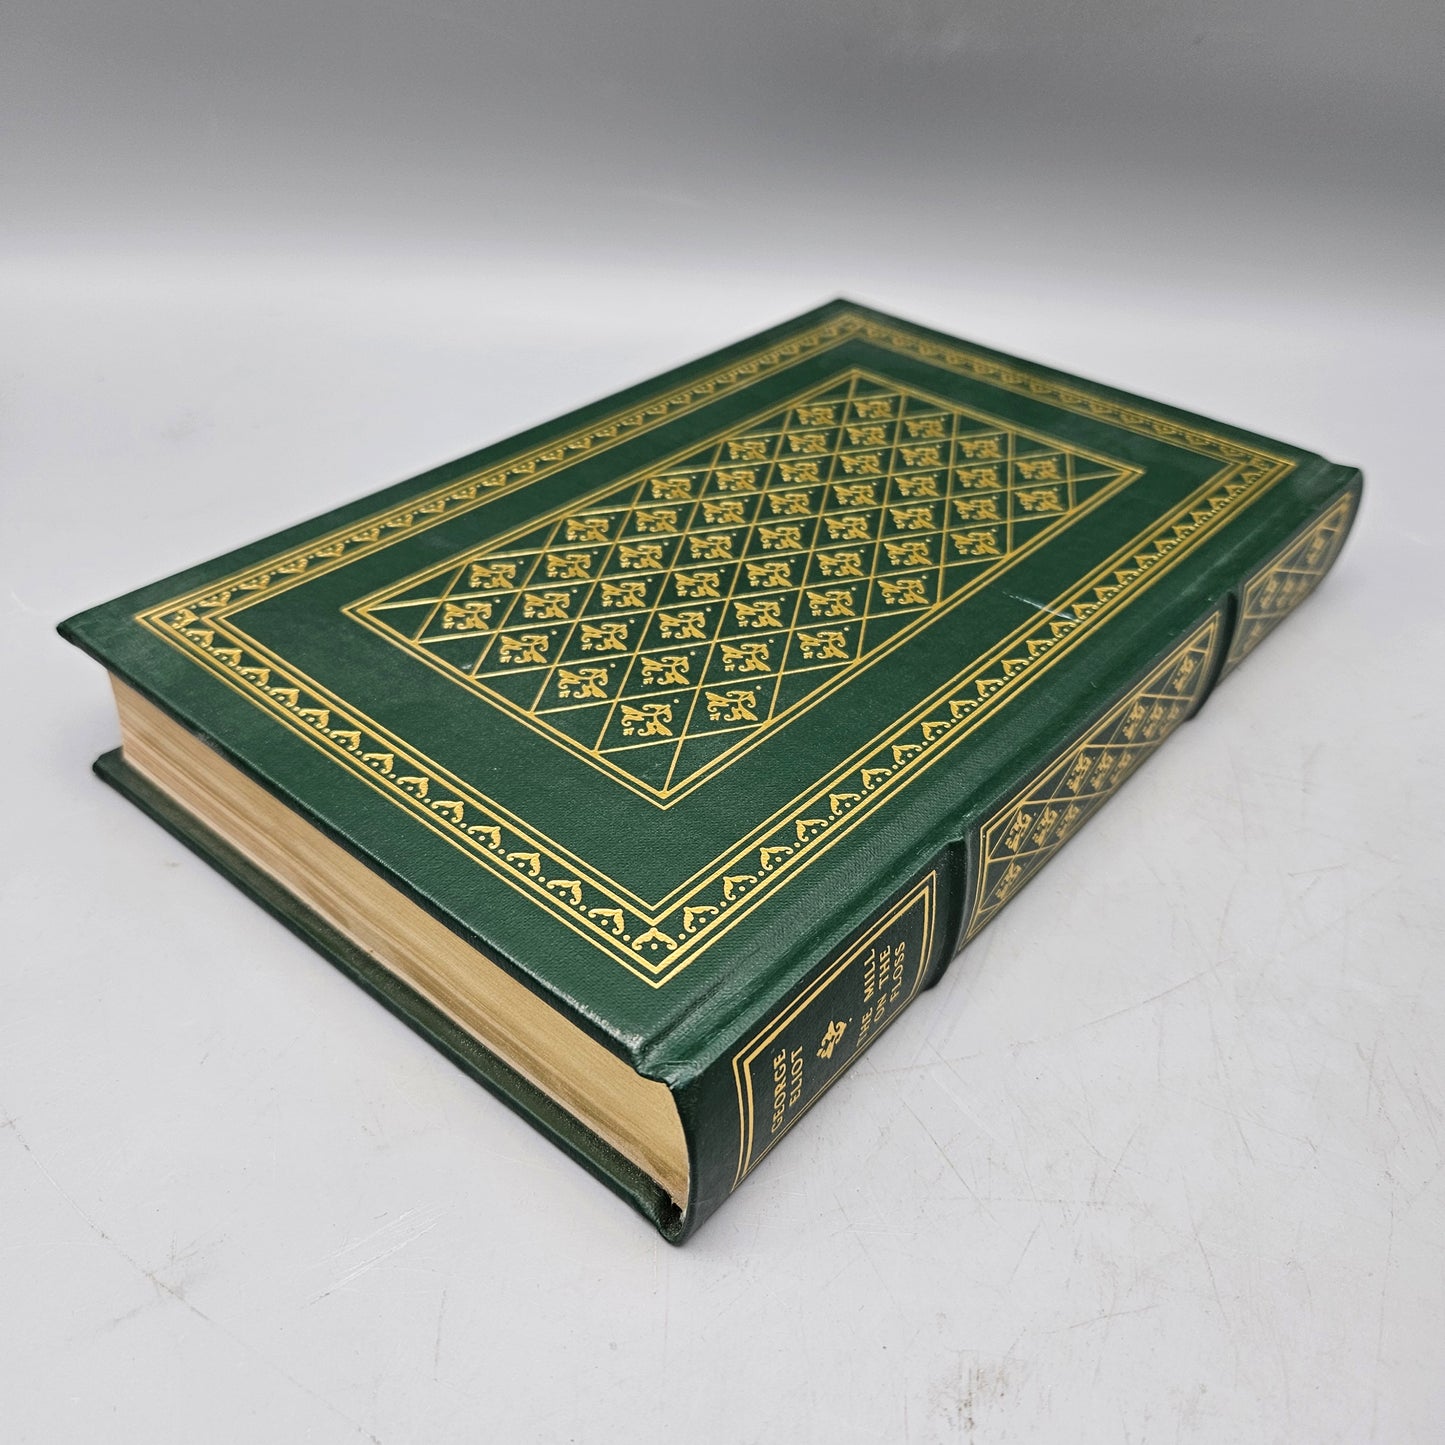 Leatherbound Book - George Eilot "The Mill on the Floss" Franklin Library